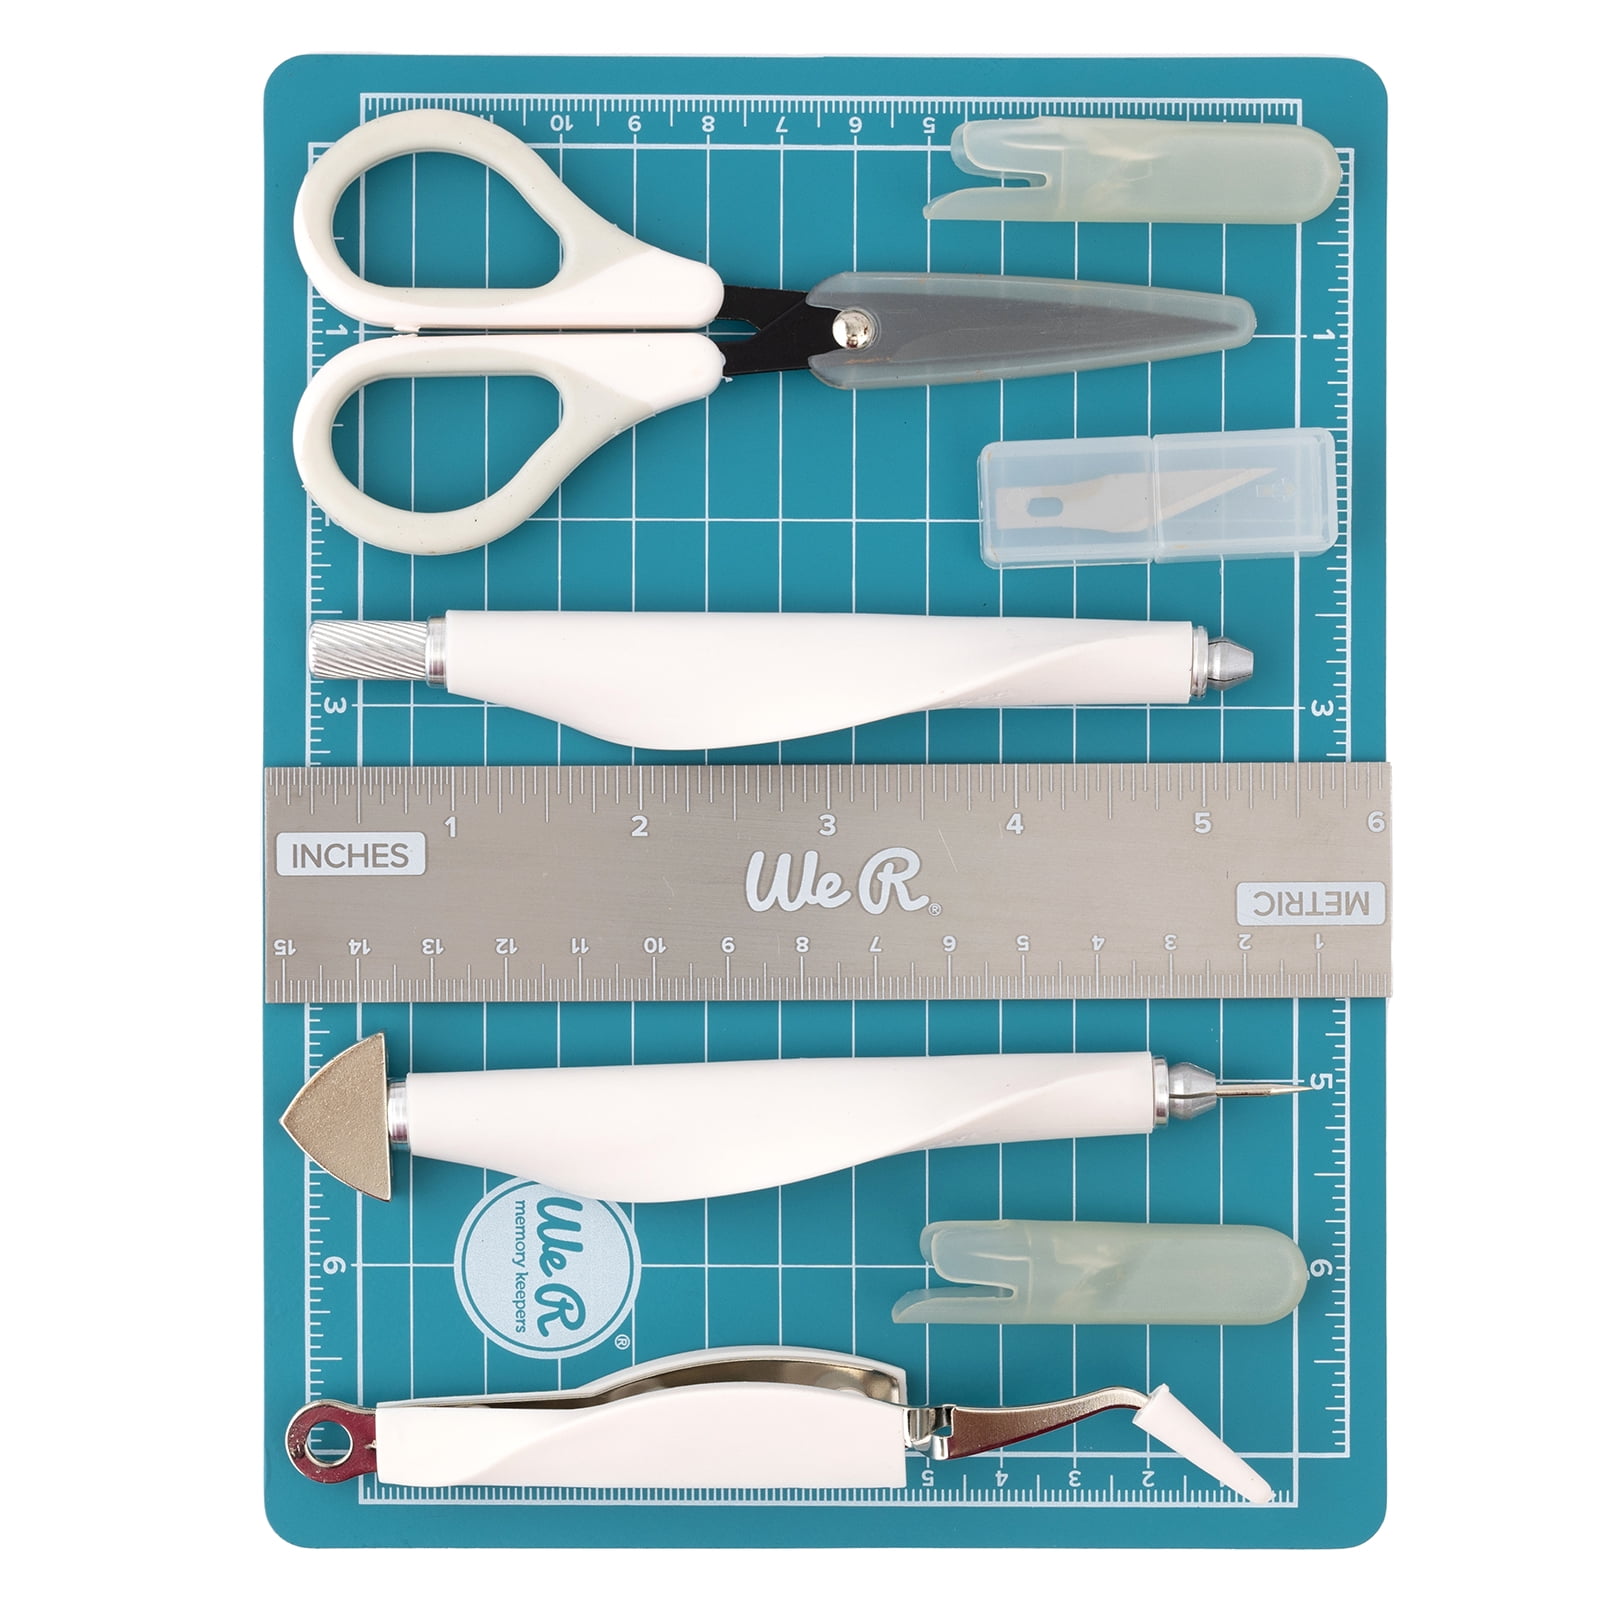 Craftaholics Anonymous®  10 Tools Every Crafter Should Own